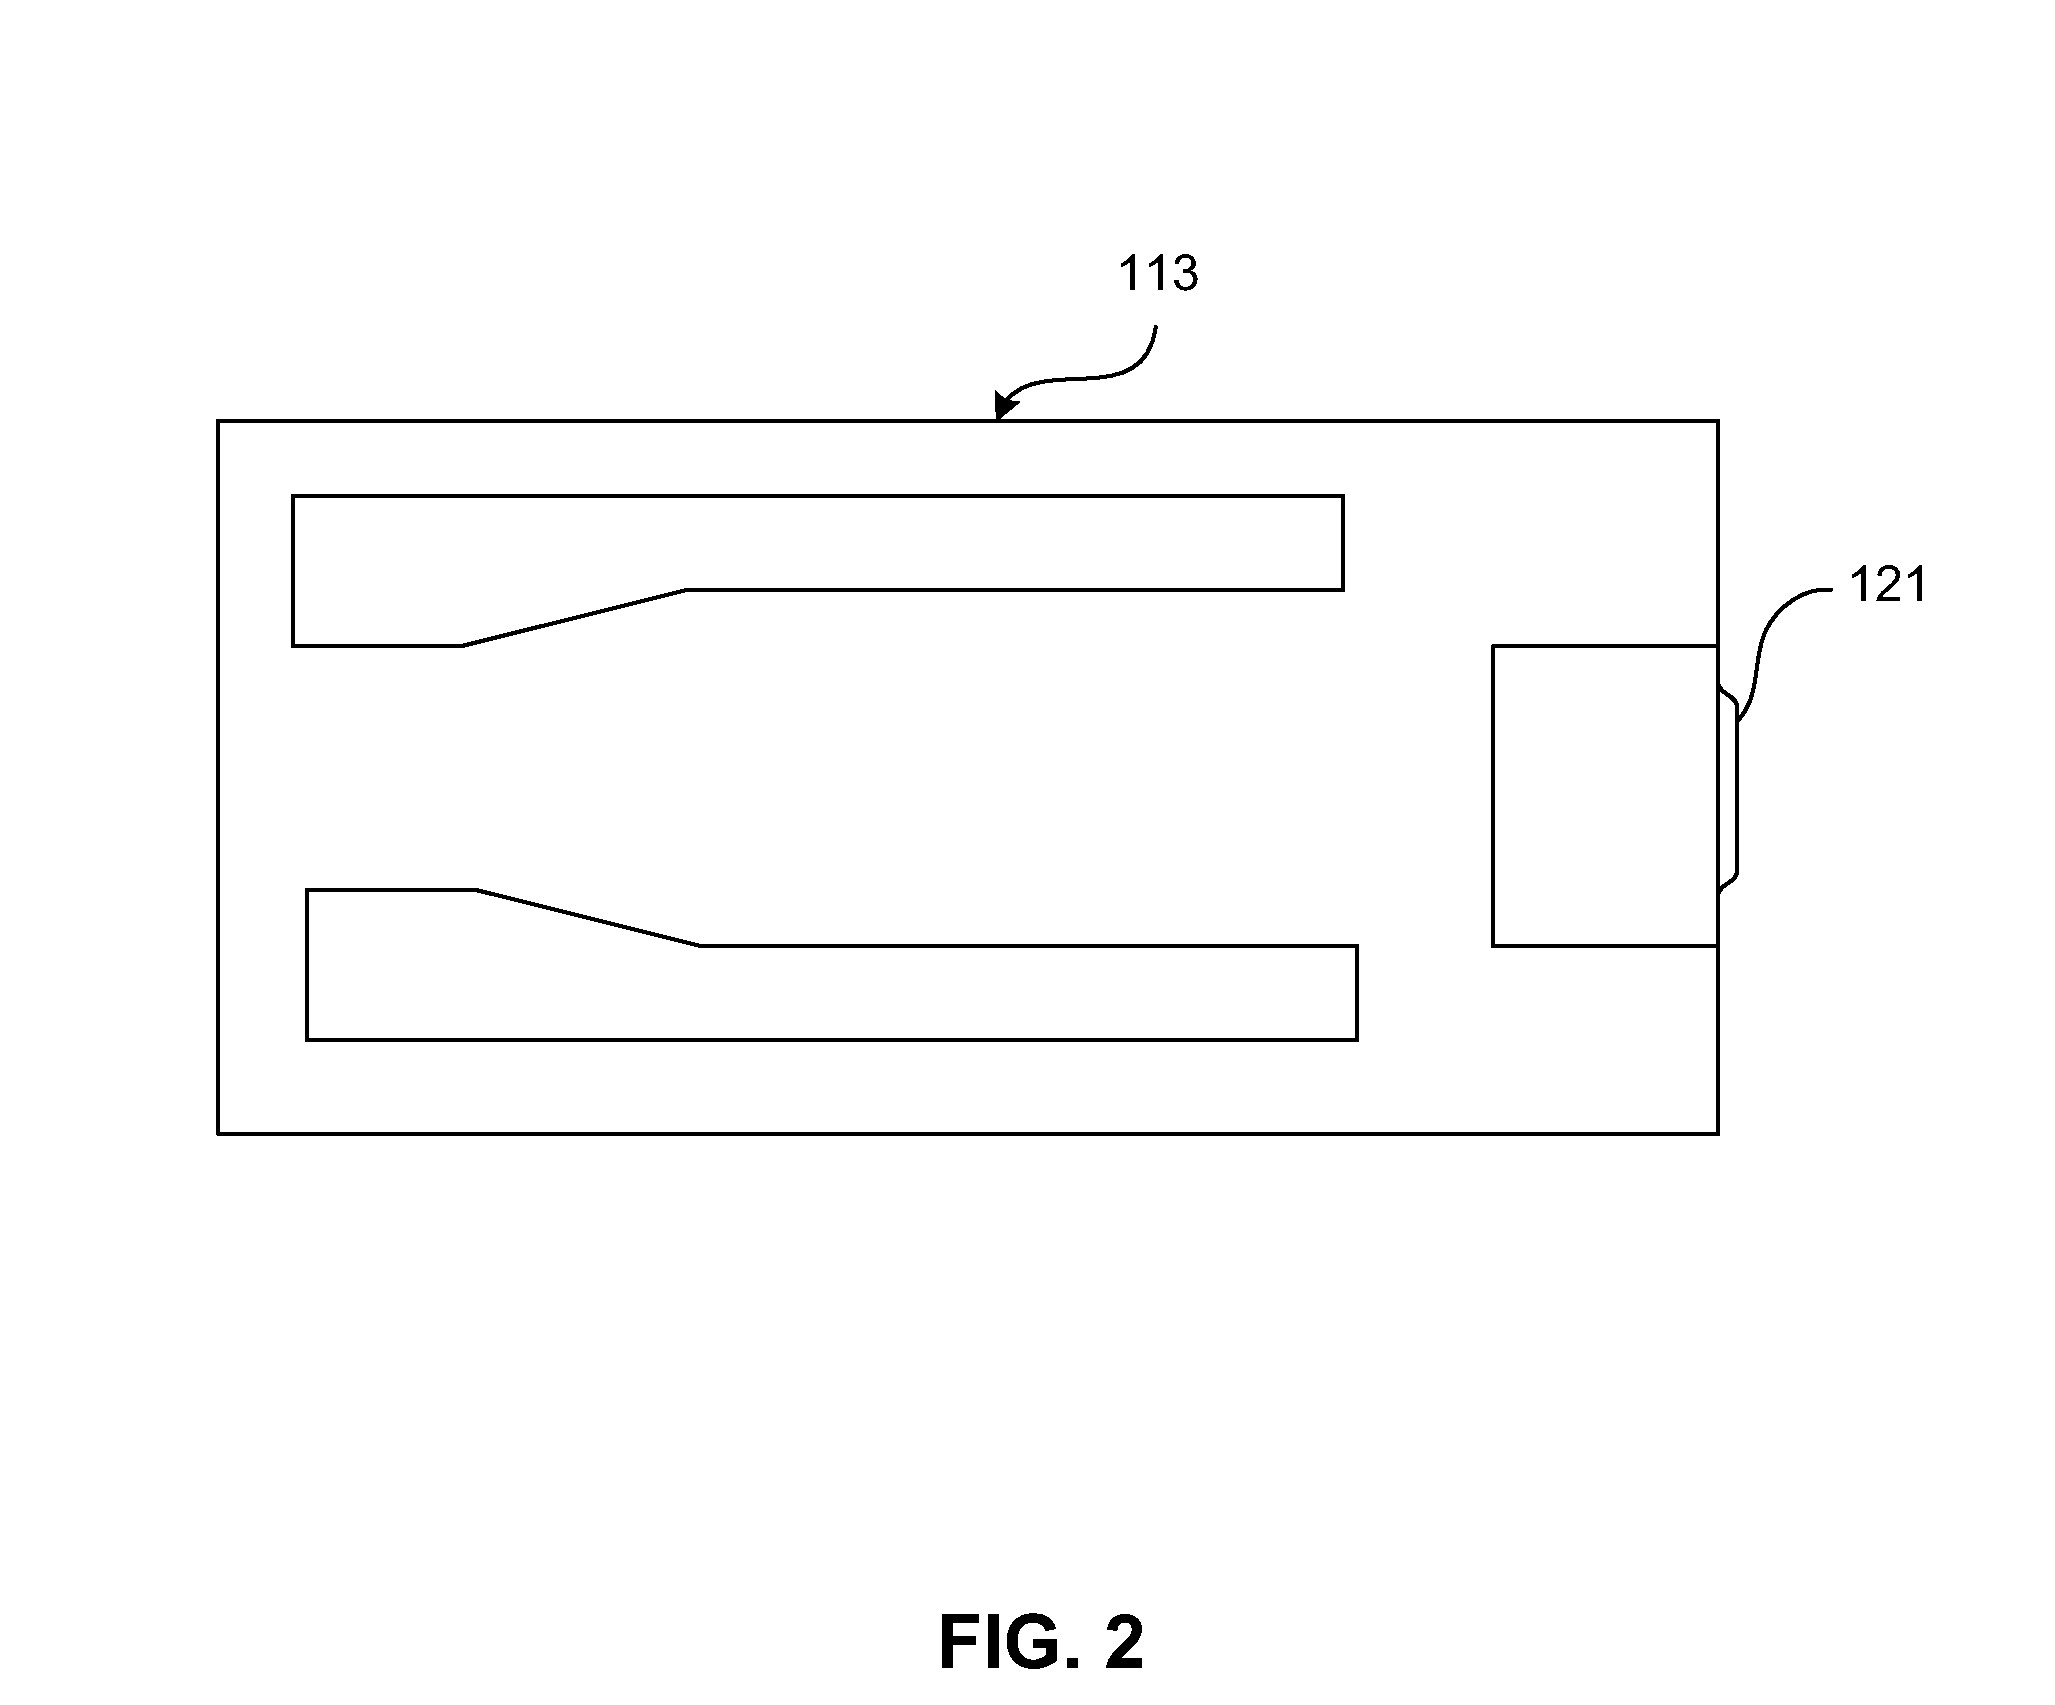 Magnetoresistive sensor having reduced read gap and strong pinned layer stability